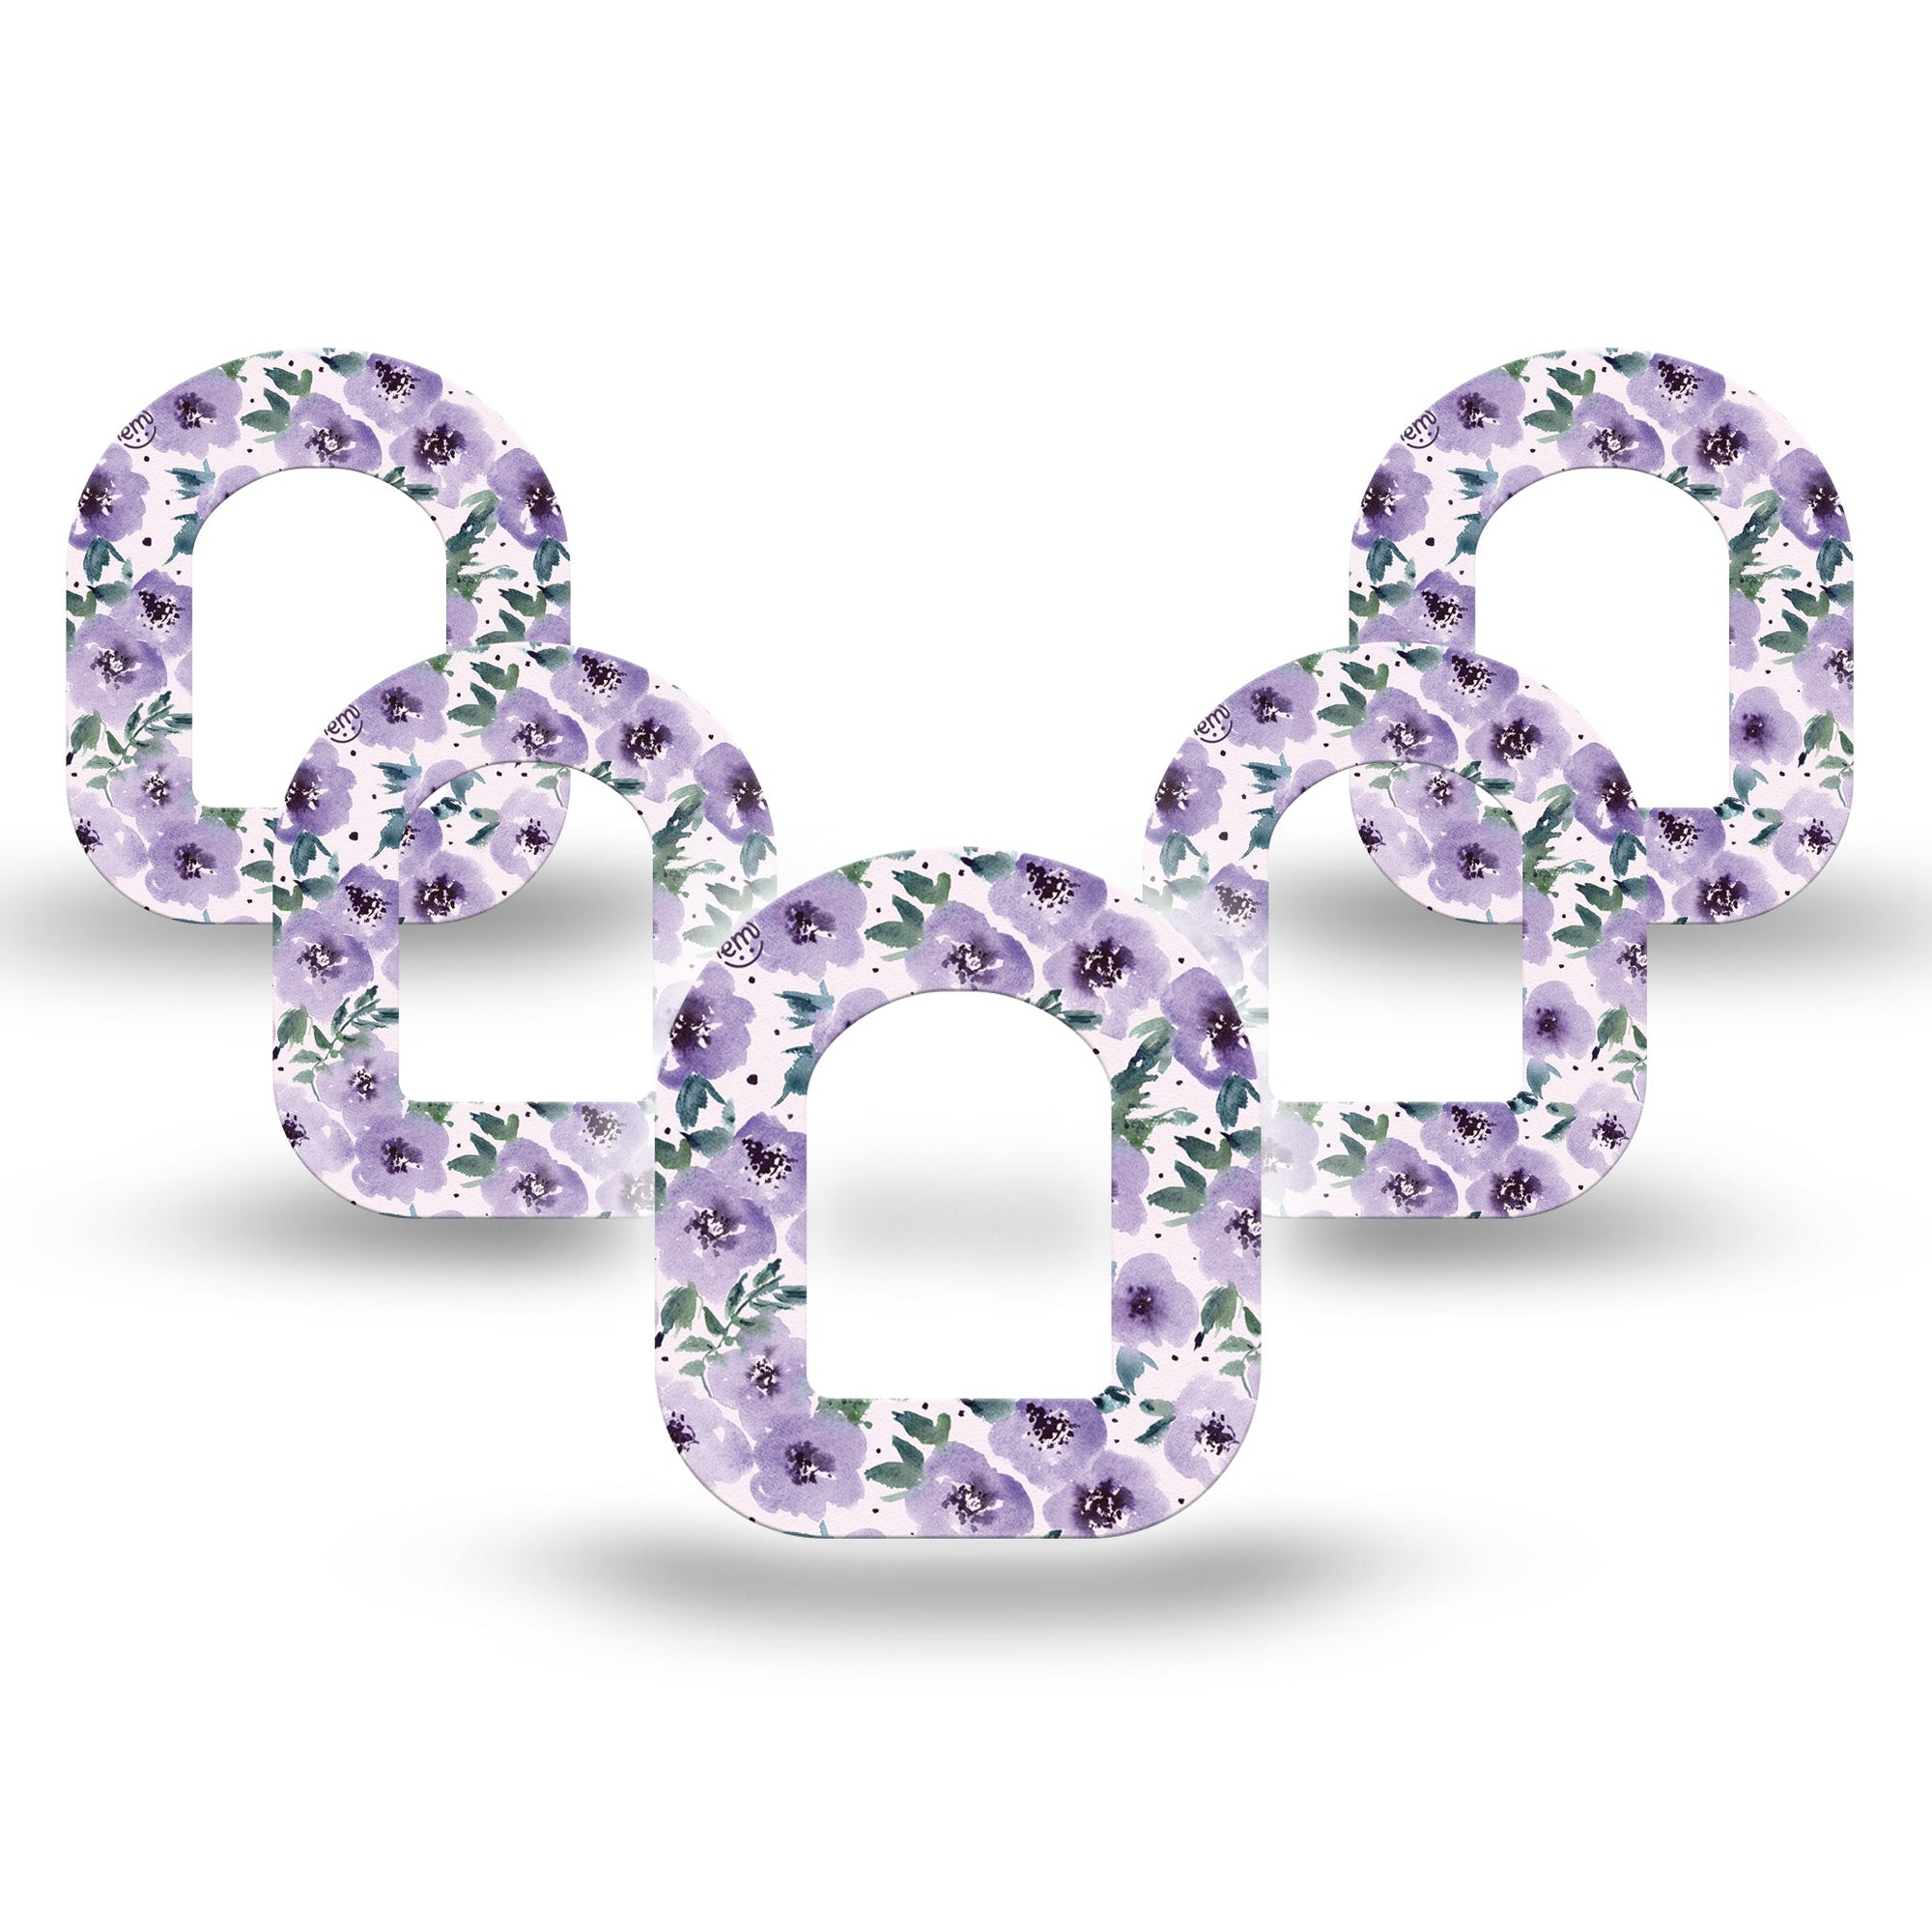 ExpressionMed Flowering Amethyst Pod Mini Tape 5-Pack, Floral Jewel Fixing Ring Tape Pump Design